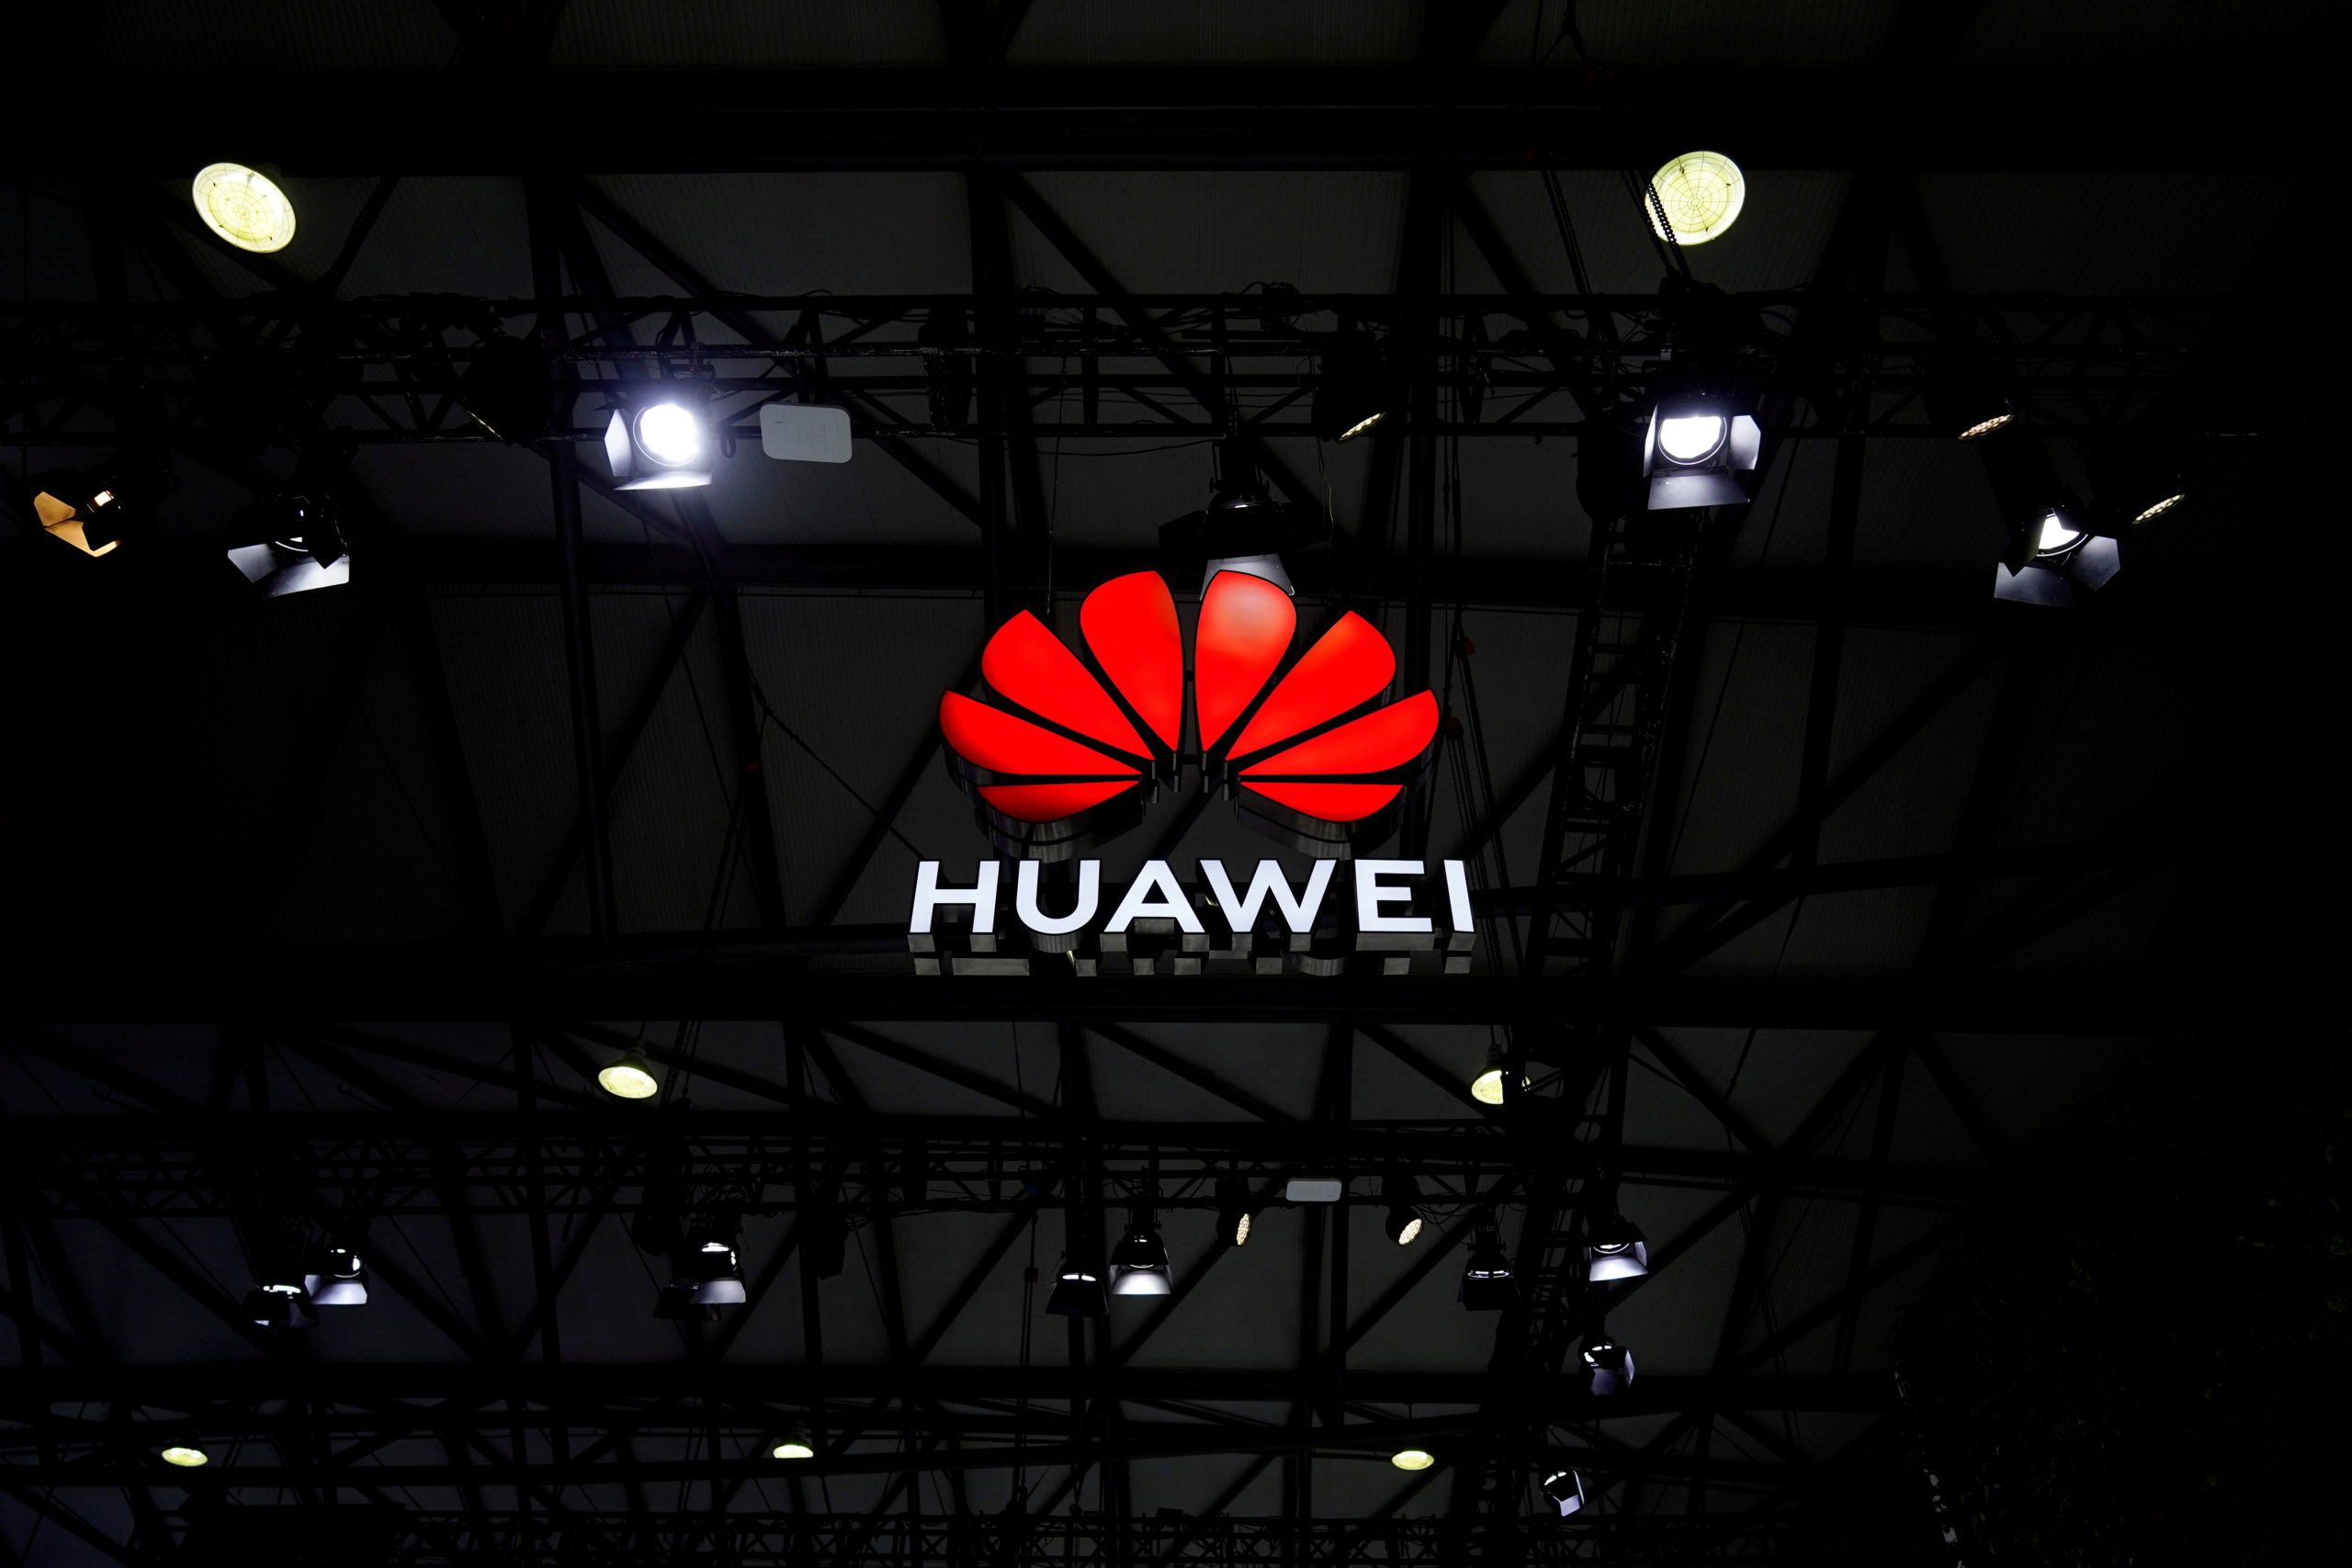 US Commerce chief says further action will be taken on Huawei if necessary